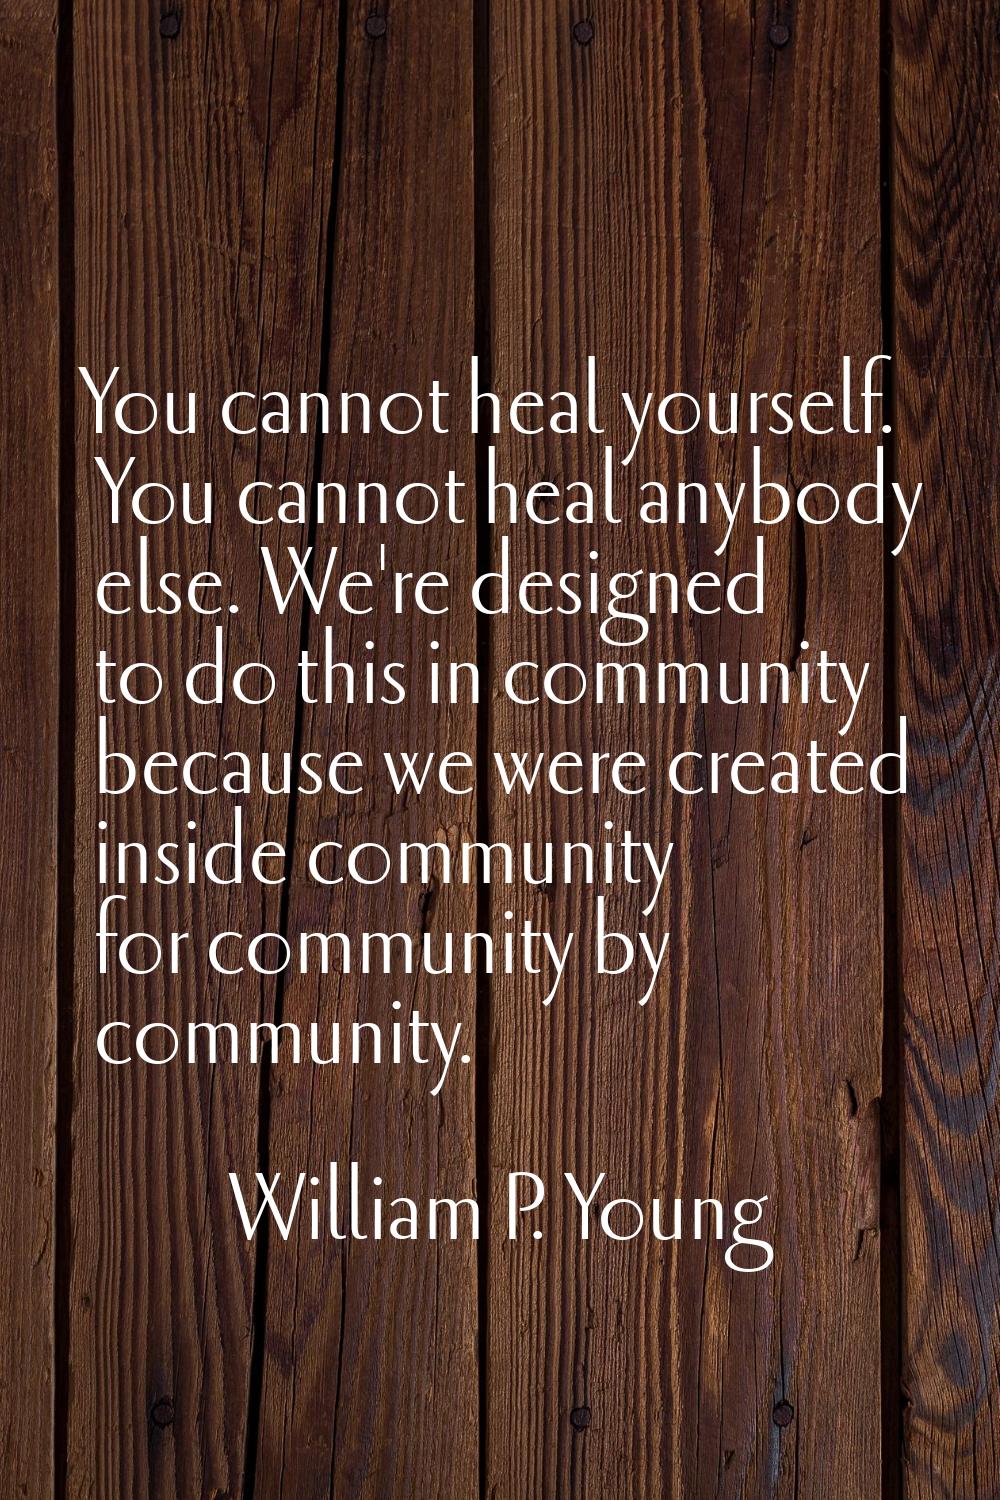 You cannot heal yourself. You cannot heal anybody else. We're designed to do this in community beca